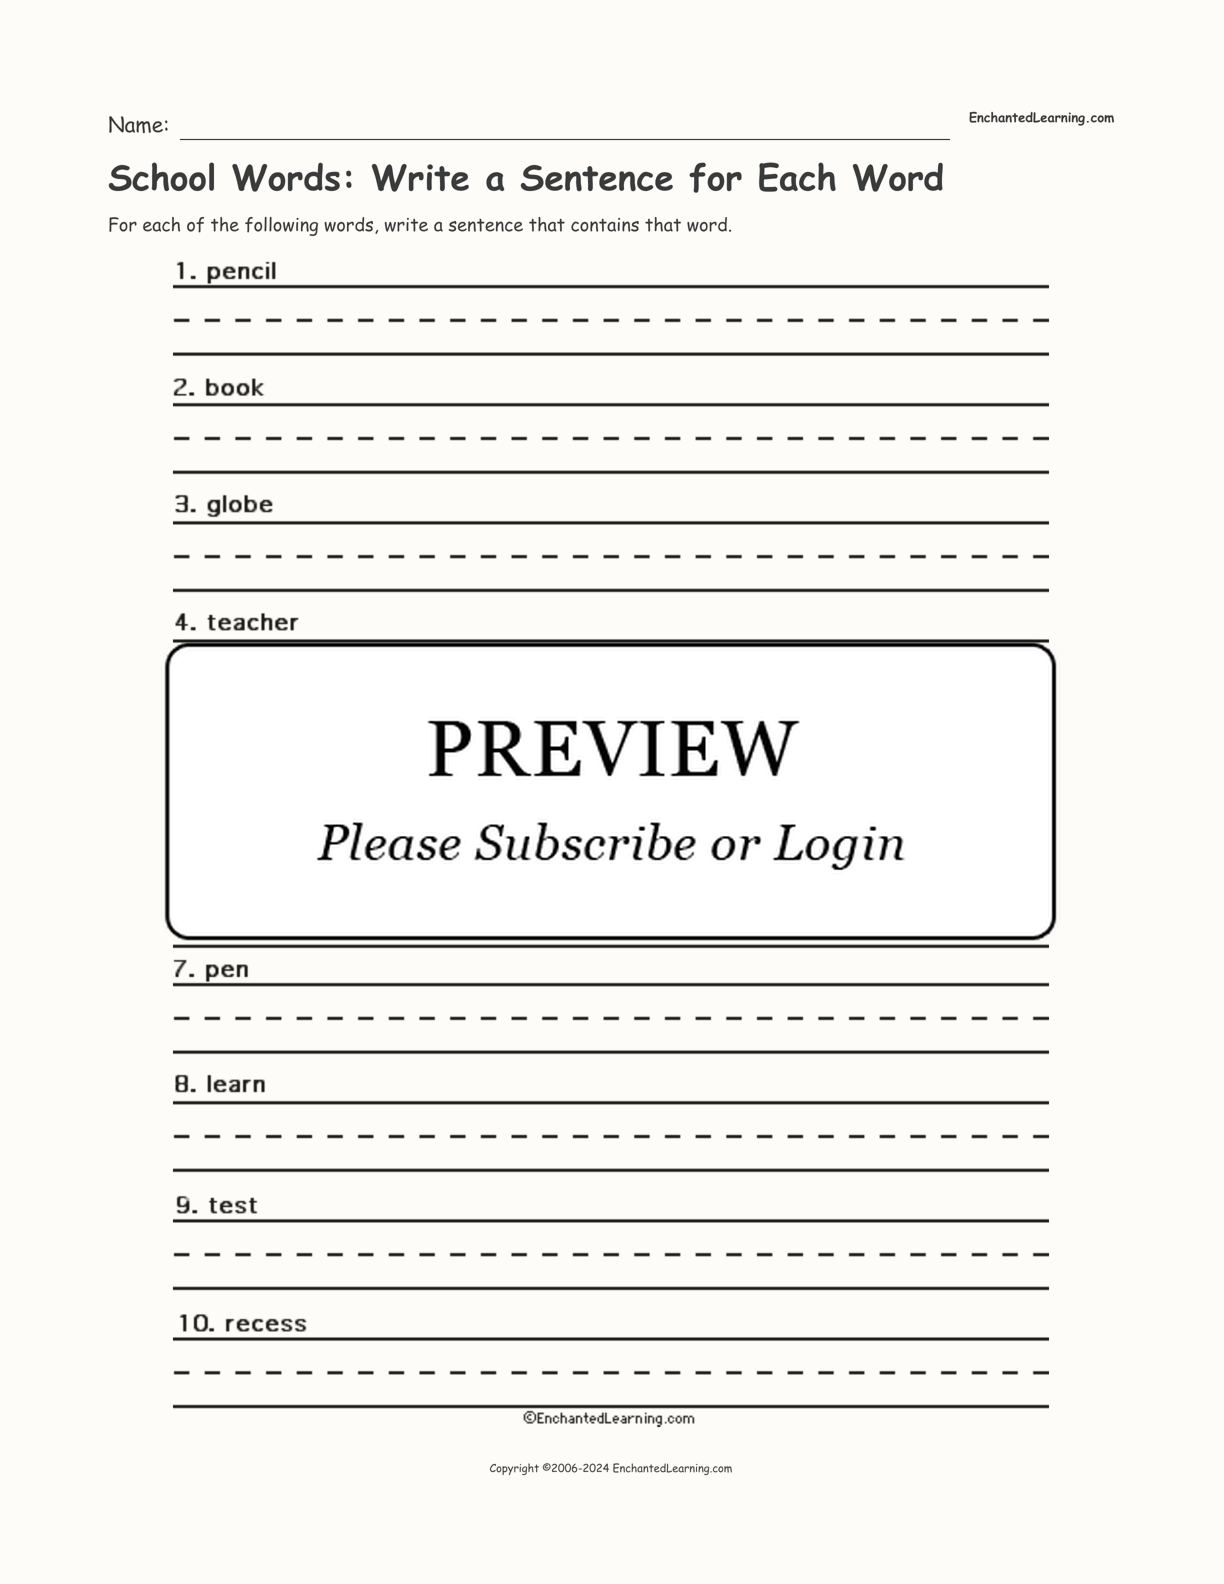 School Words: Write a Sentence for Each Word interactive worksheet page 1